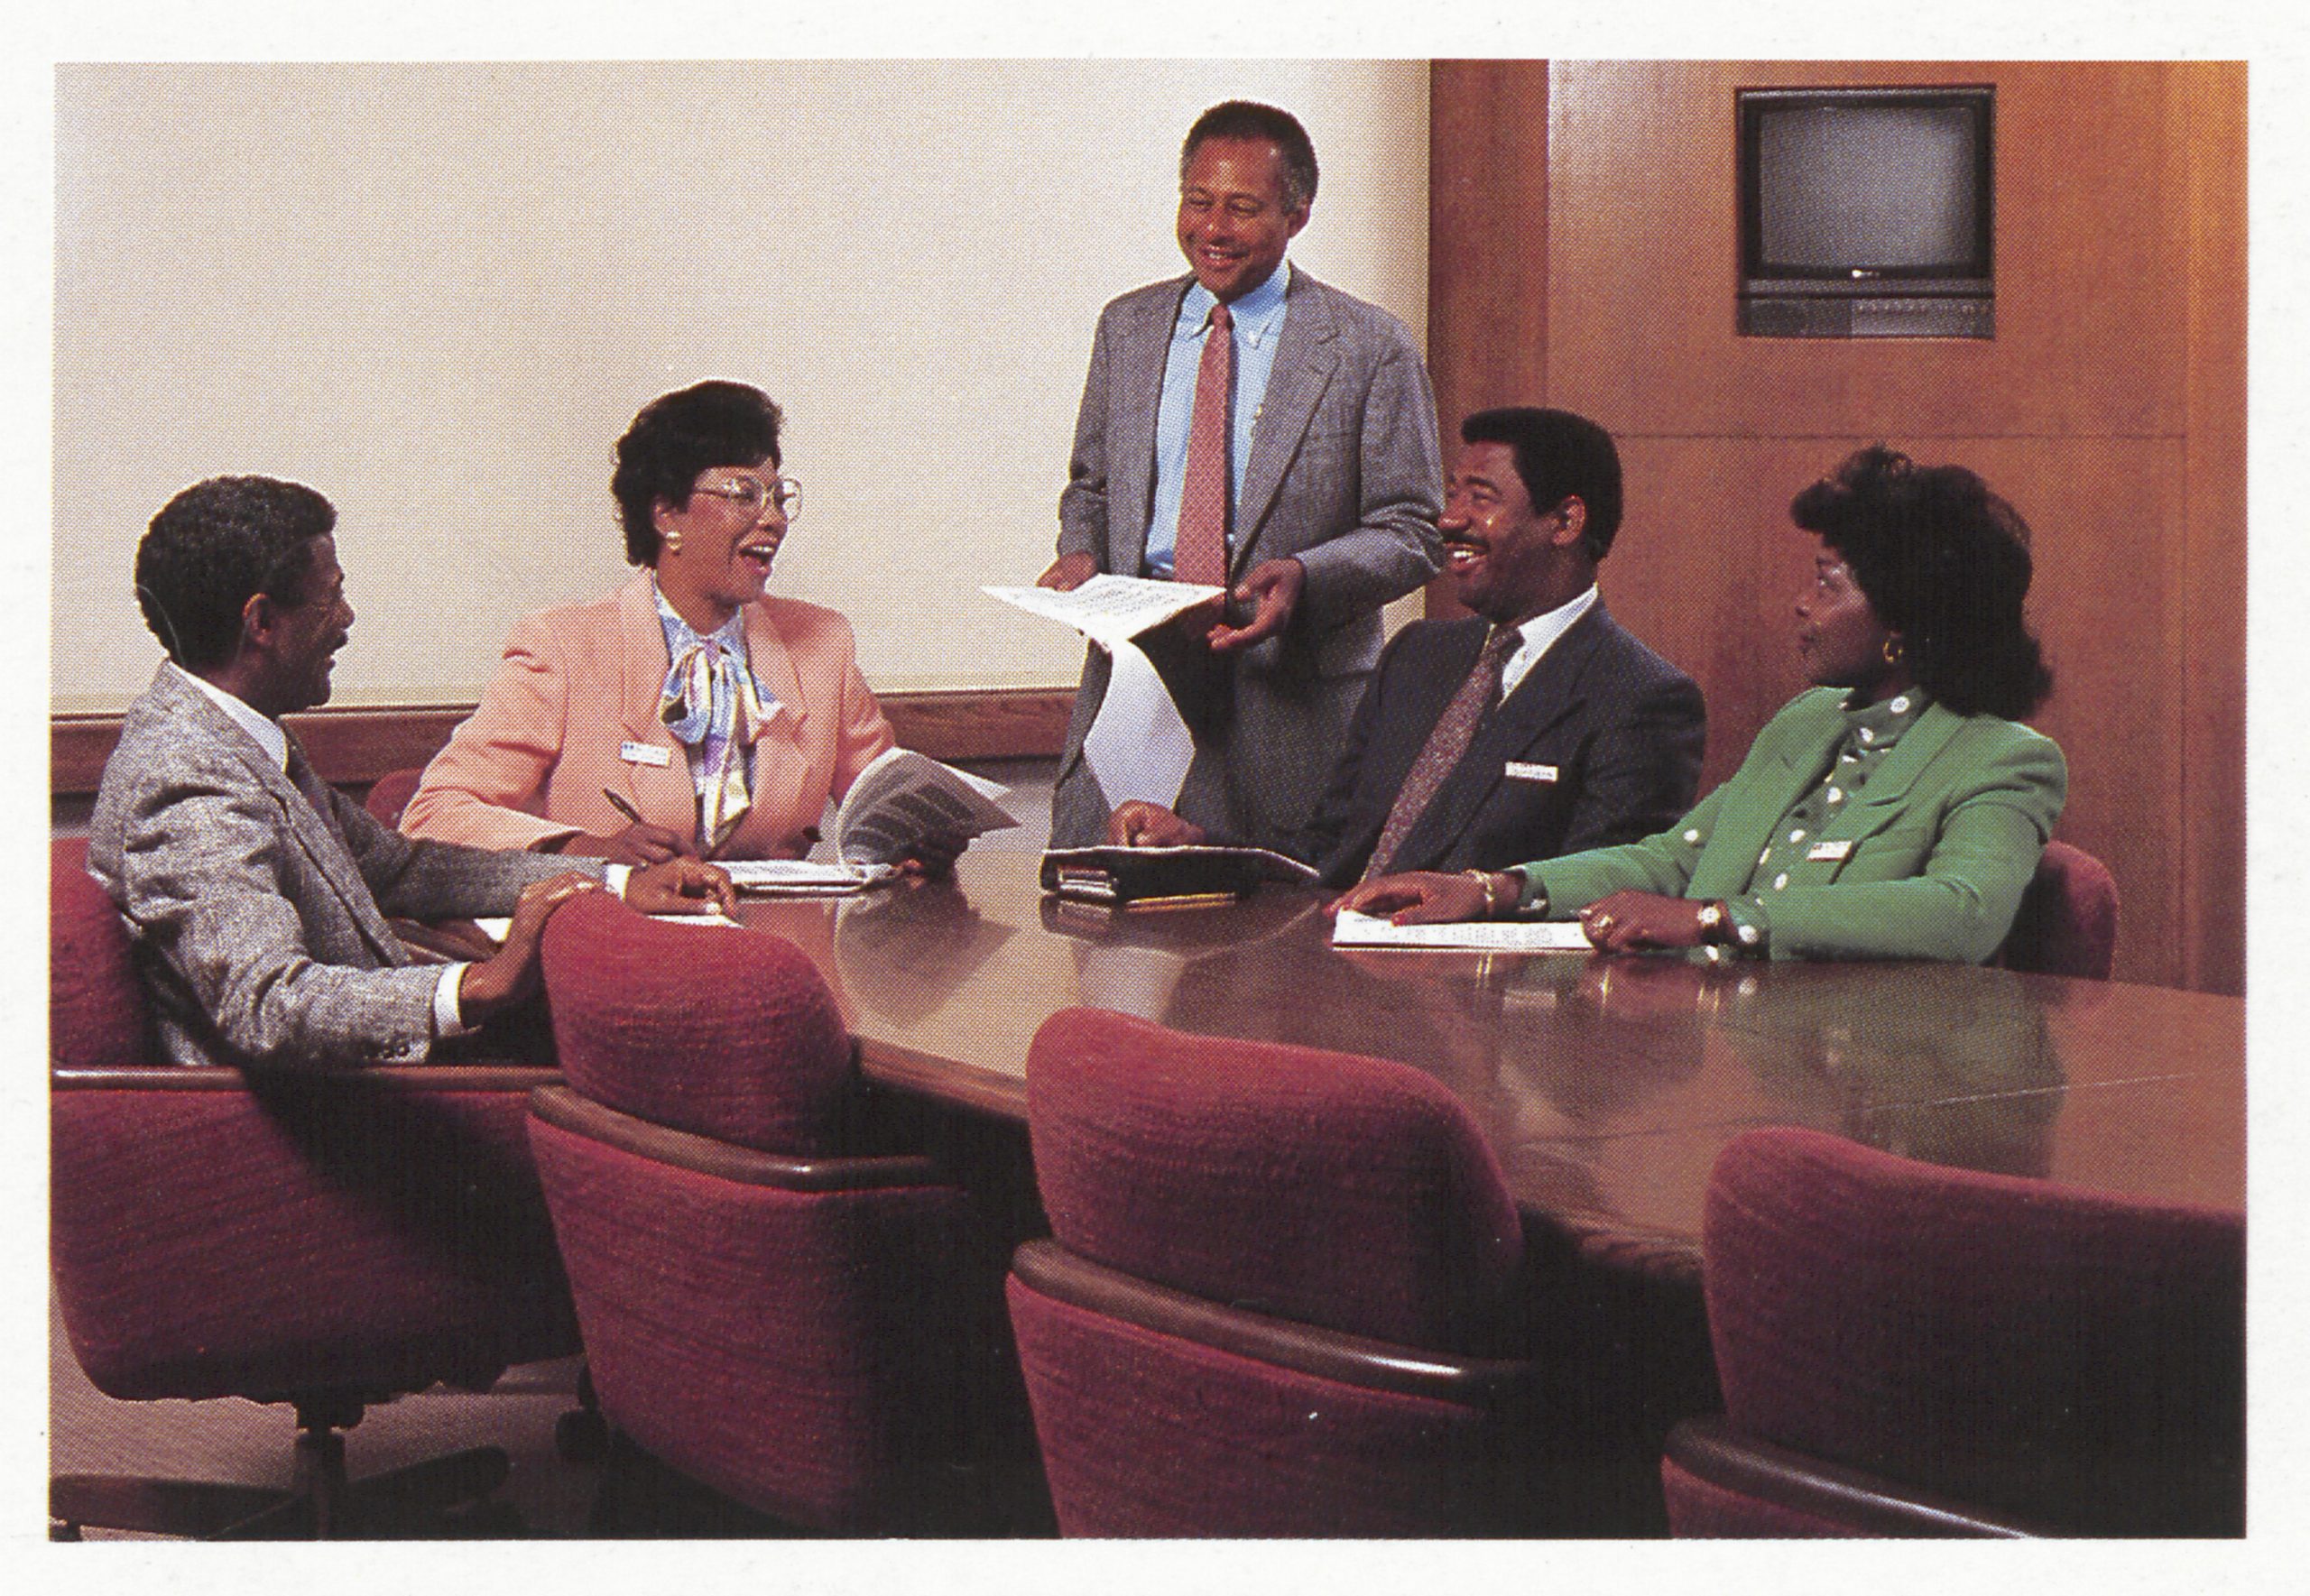 Aaron Kennedy, Bess Stevens, Tony G. Coleman, Claude Robinson Jr. & Alice Morrison of the Black functional managers network.